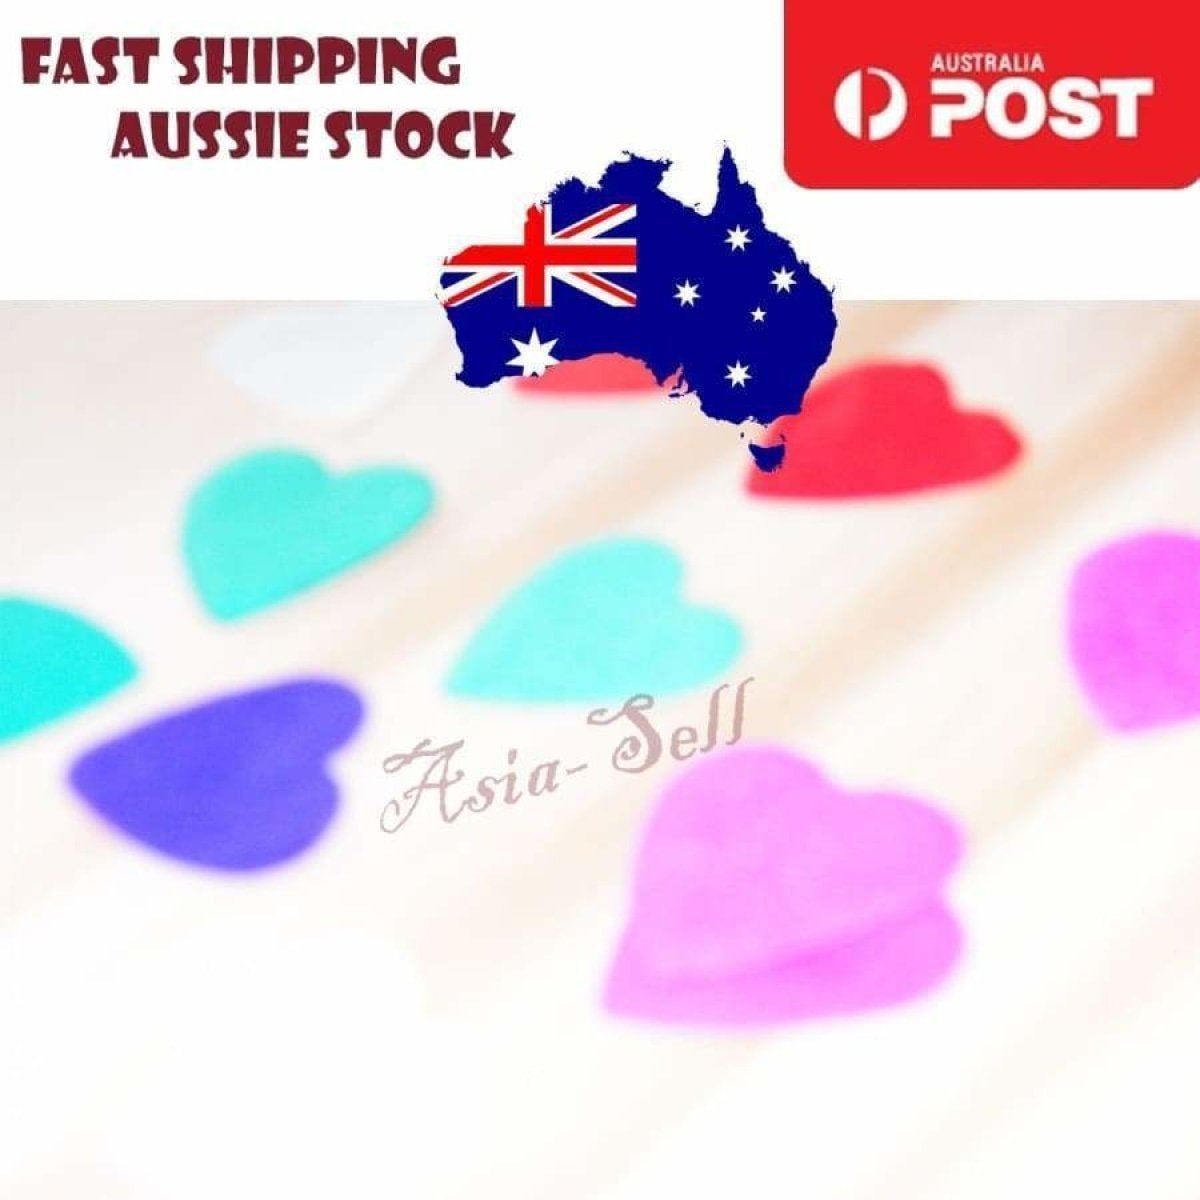 2000pcs Confetti Hearts Paper Wedding Valentines 25mm Blue Red White Green Pink - - Asia Sell